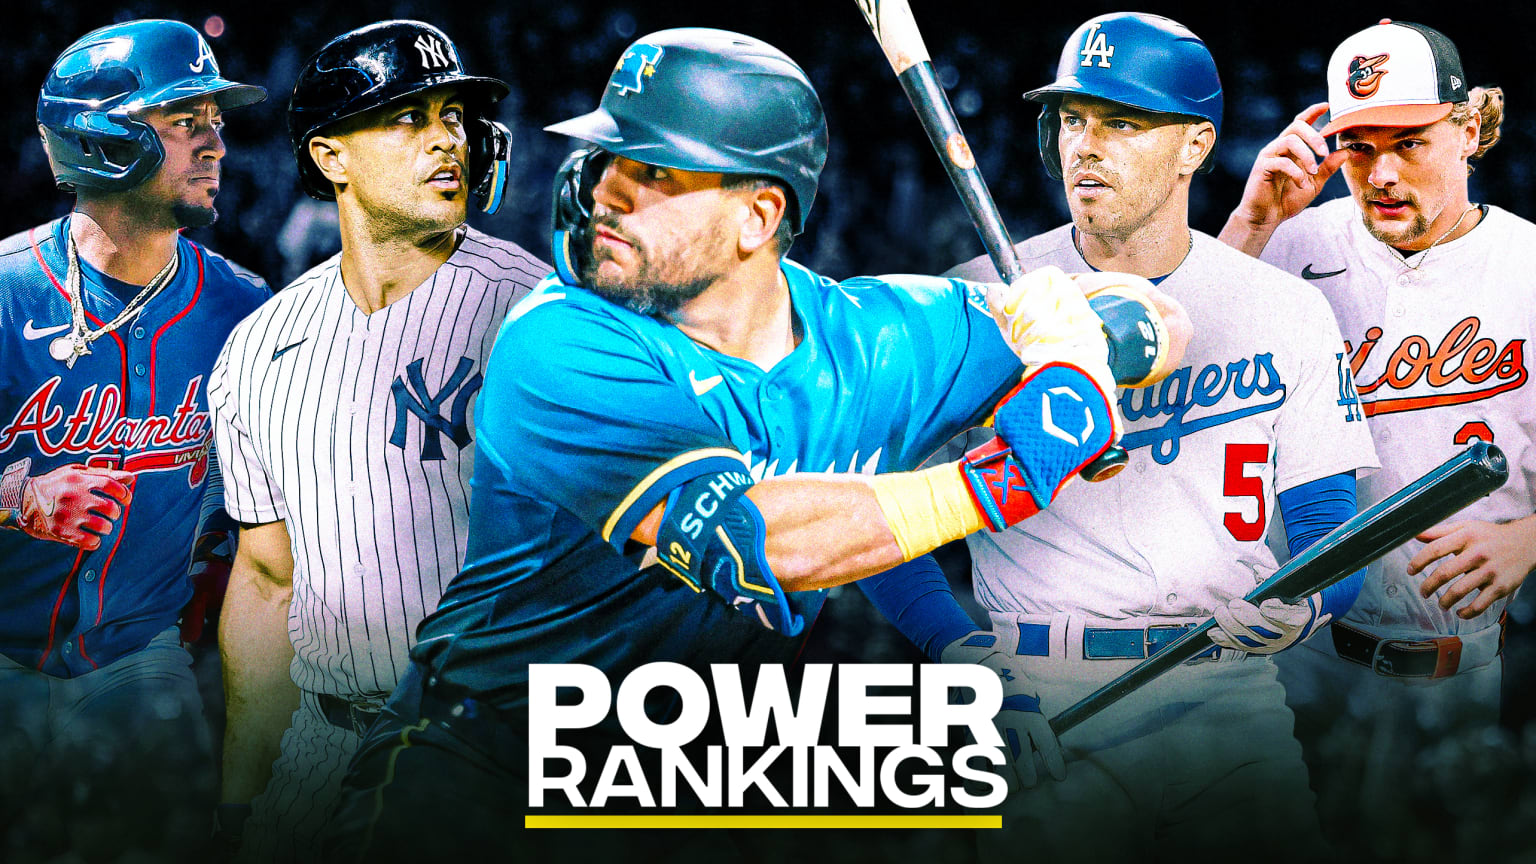 A new team takes over the top spot in Power Rankings